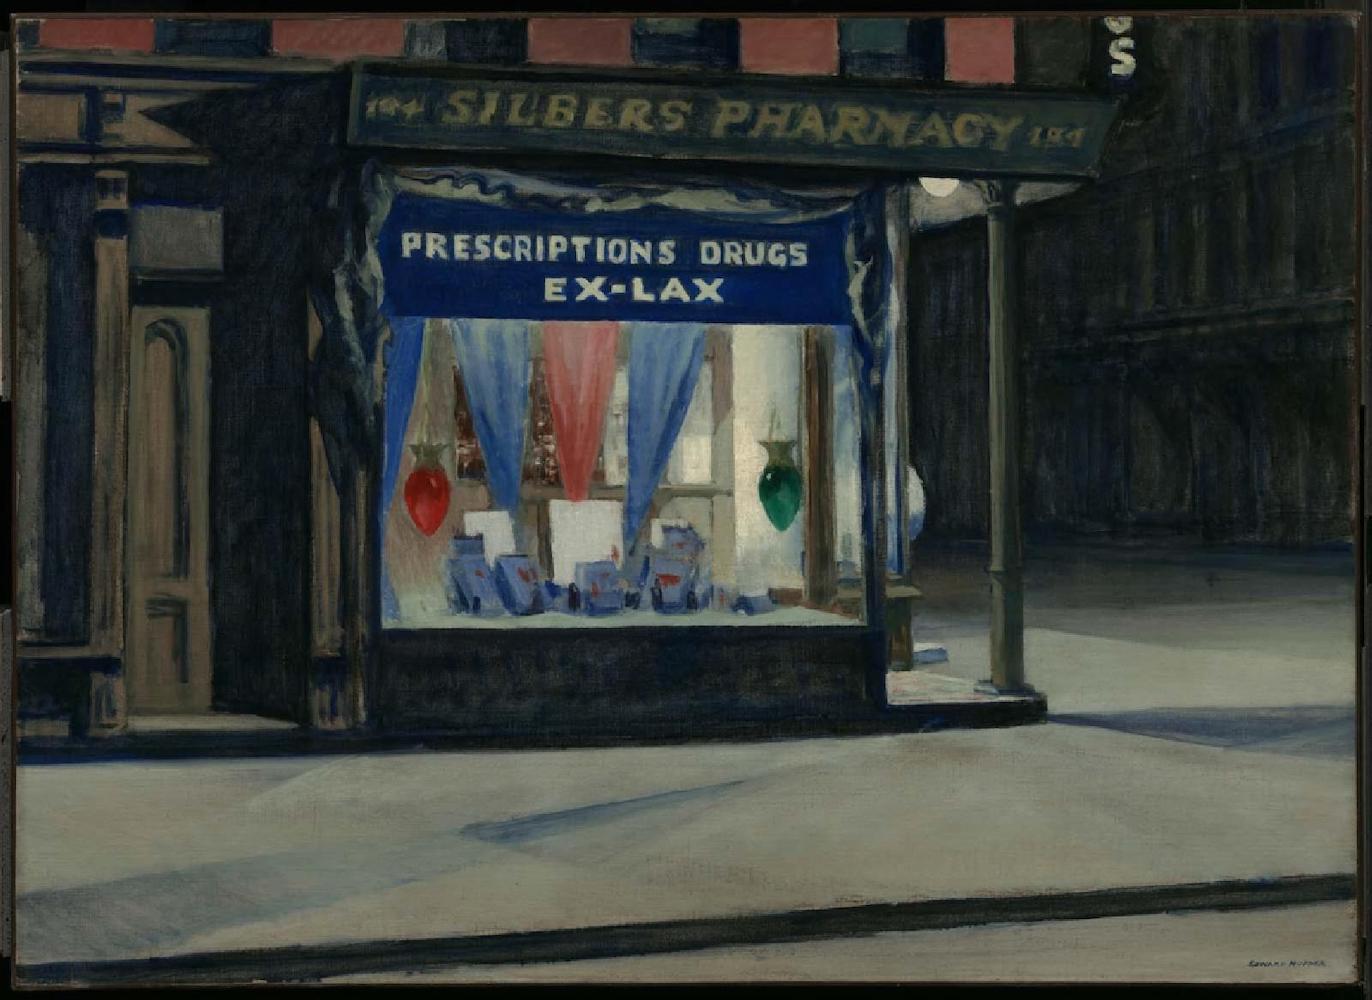 “A reproduction of a painting by Edward Hopper, which shows the facade of a drug store illuminated from within at night.”